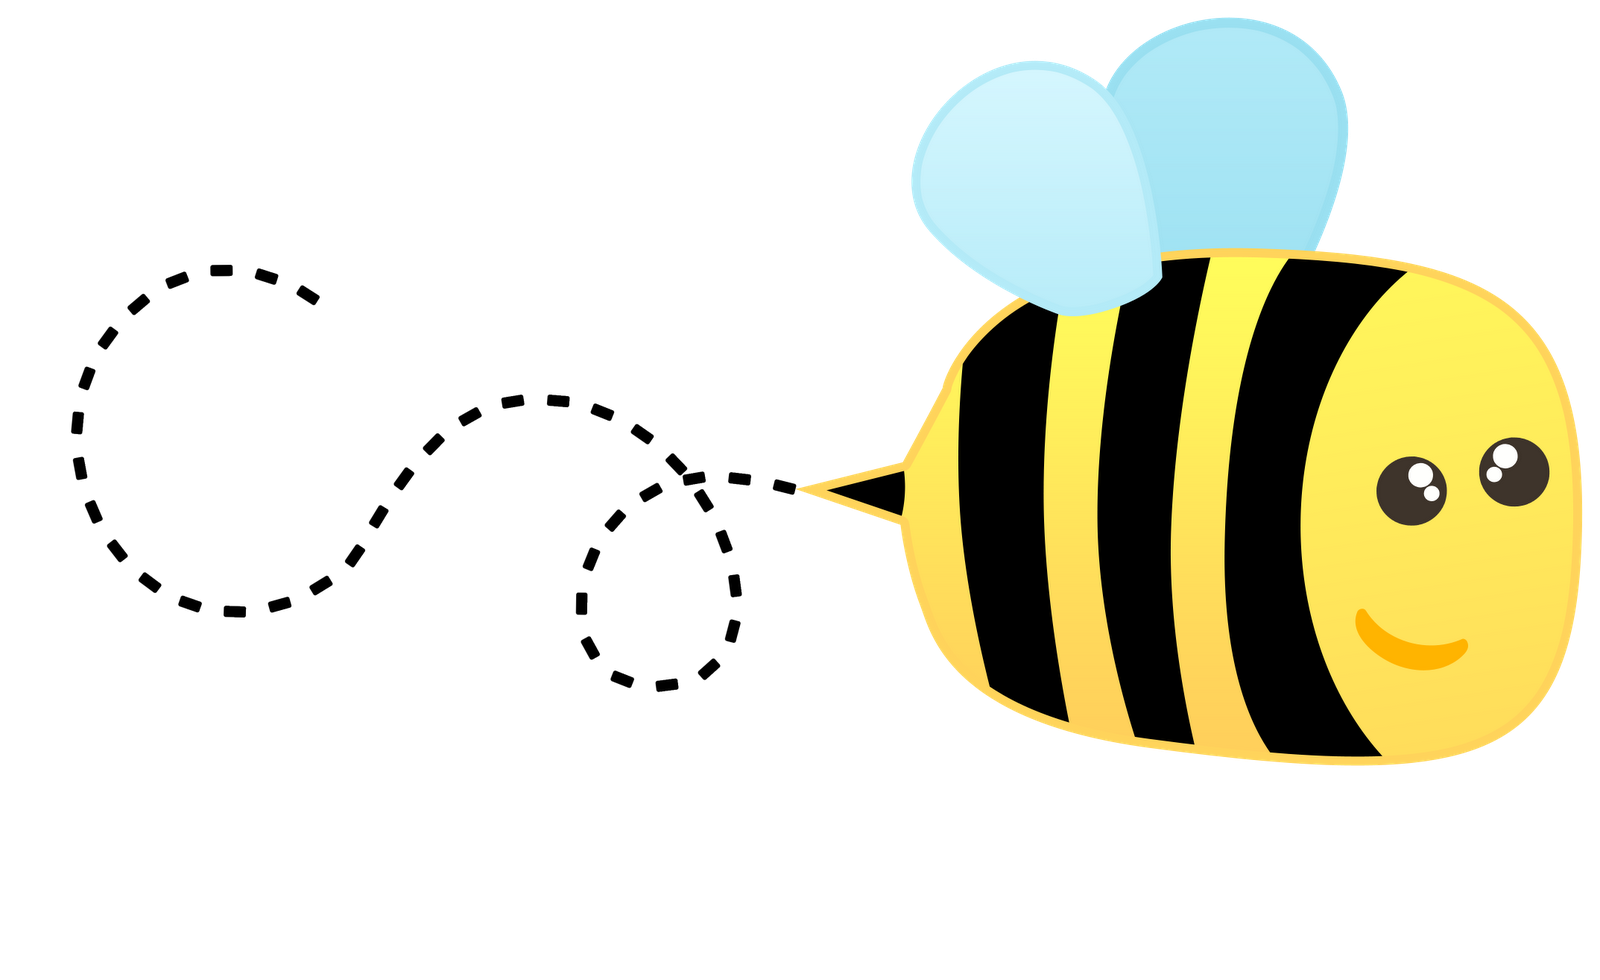 Pngtree offers bumble bee png and vector images, as well as transparant bac...